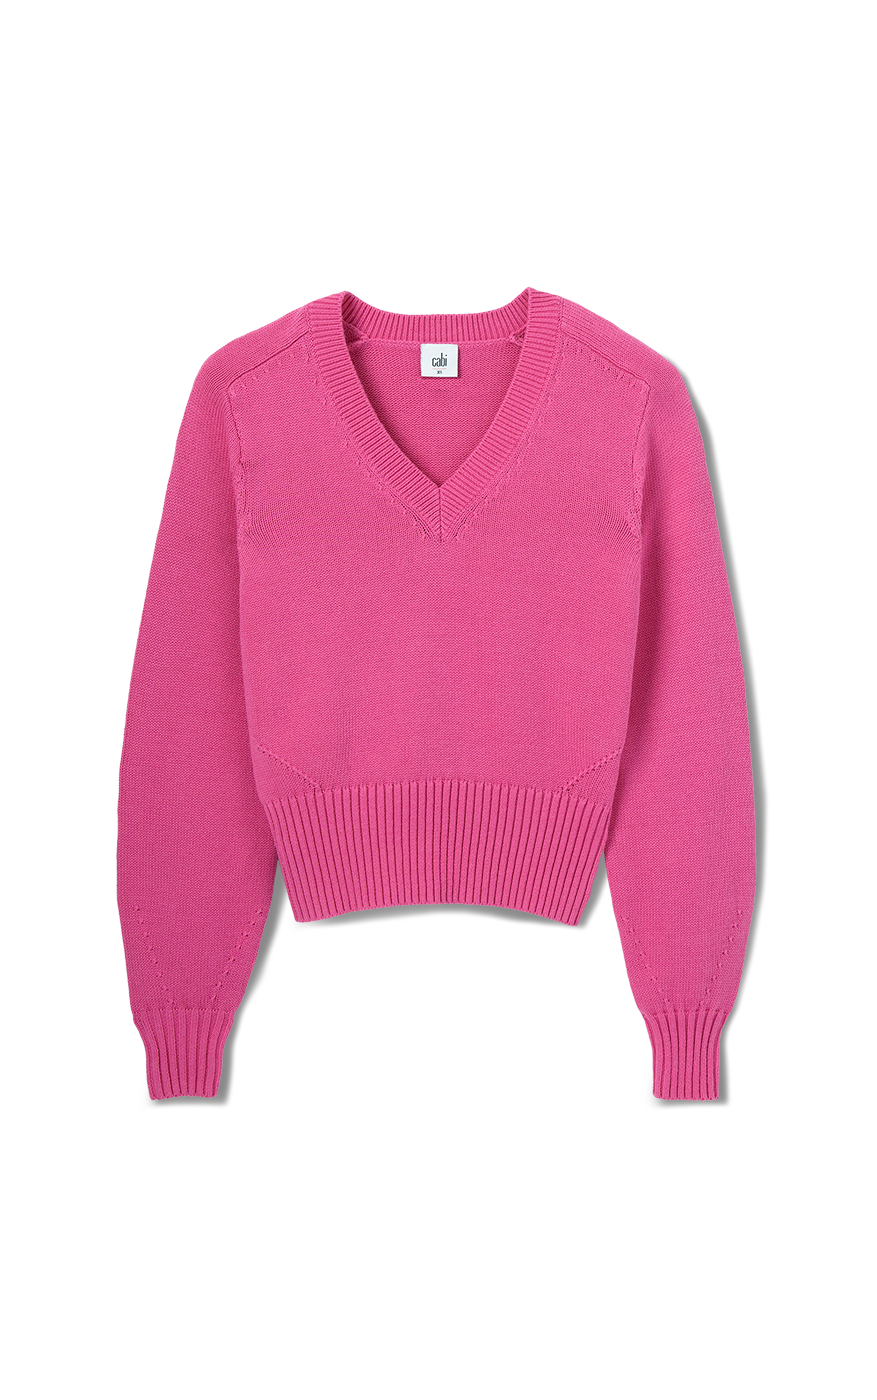 Precious Oatmeal and Pink Heart Sweater - Cute Women's Sweaters